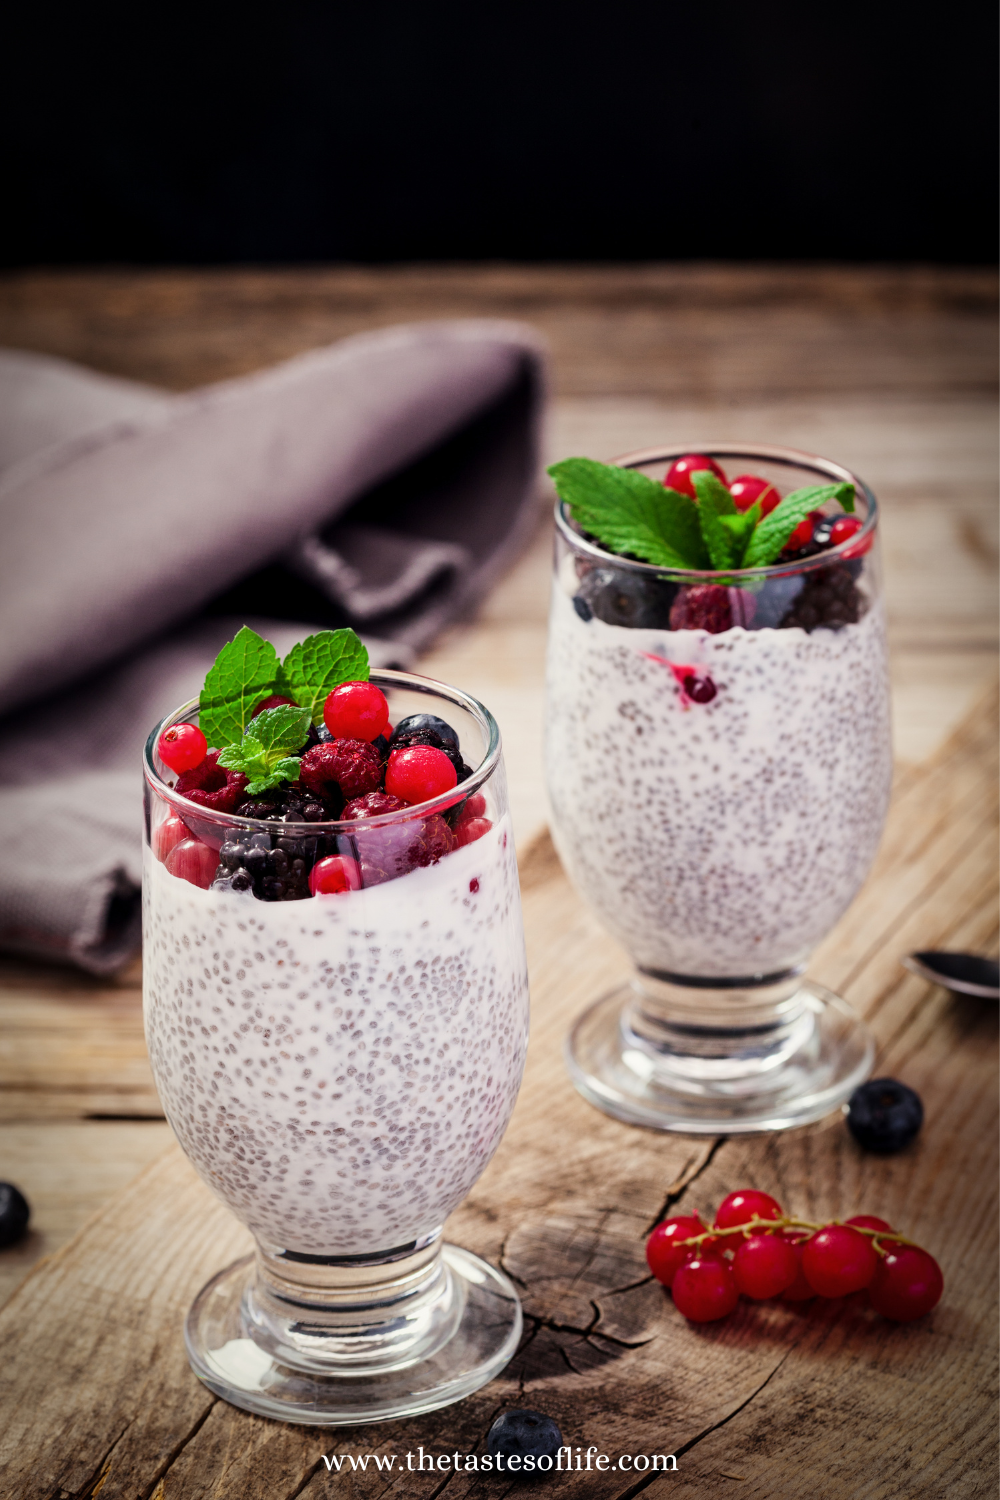 Why Chia Seeds Is Great For Hormonal Balance